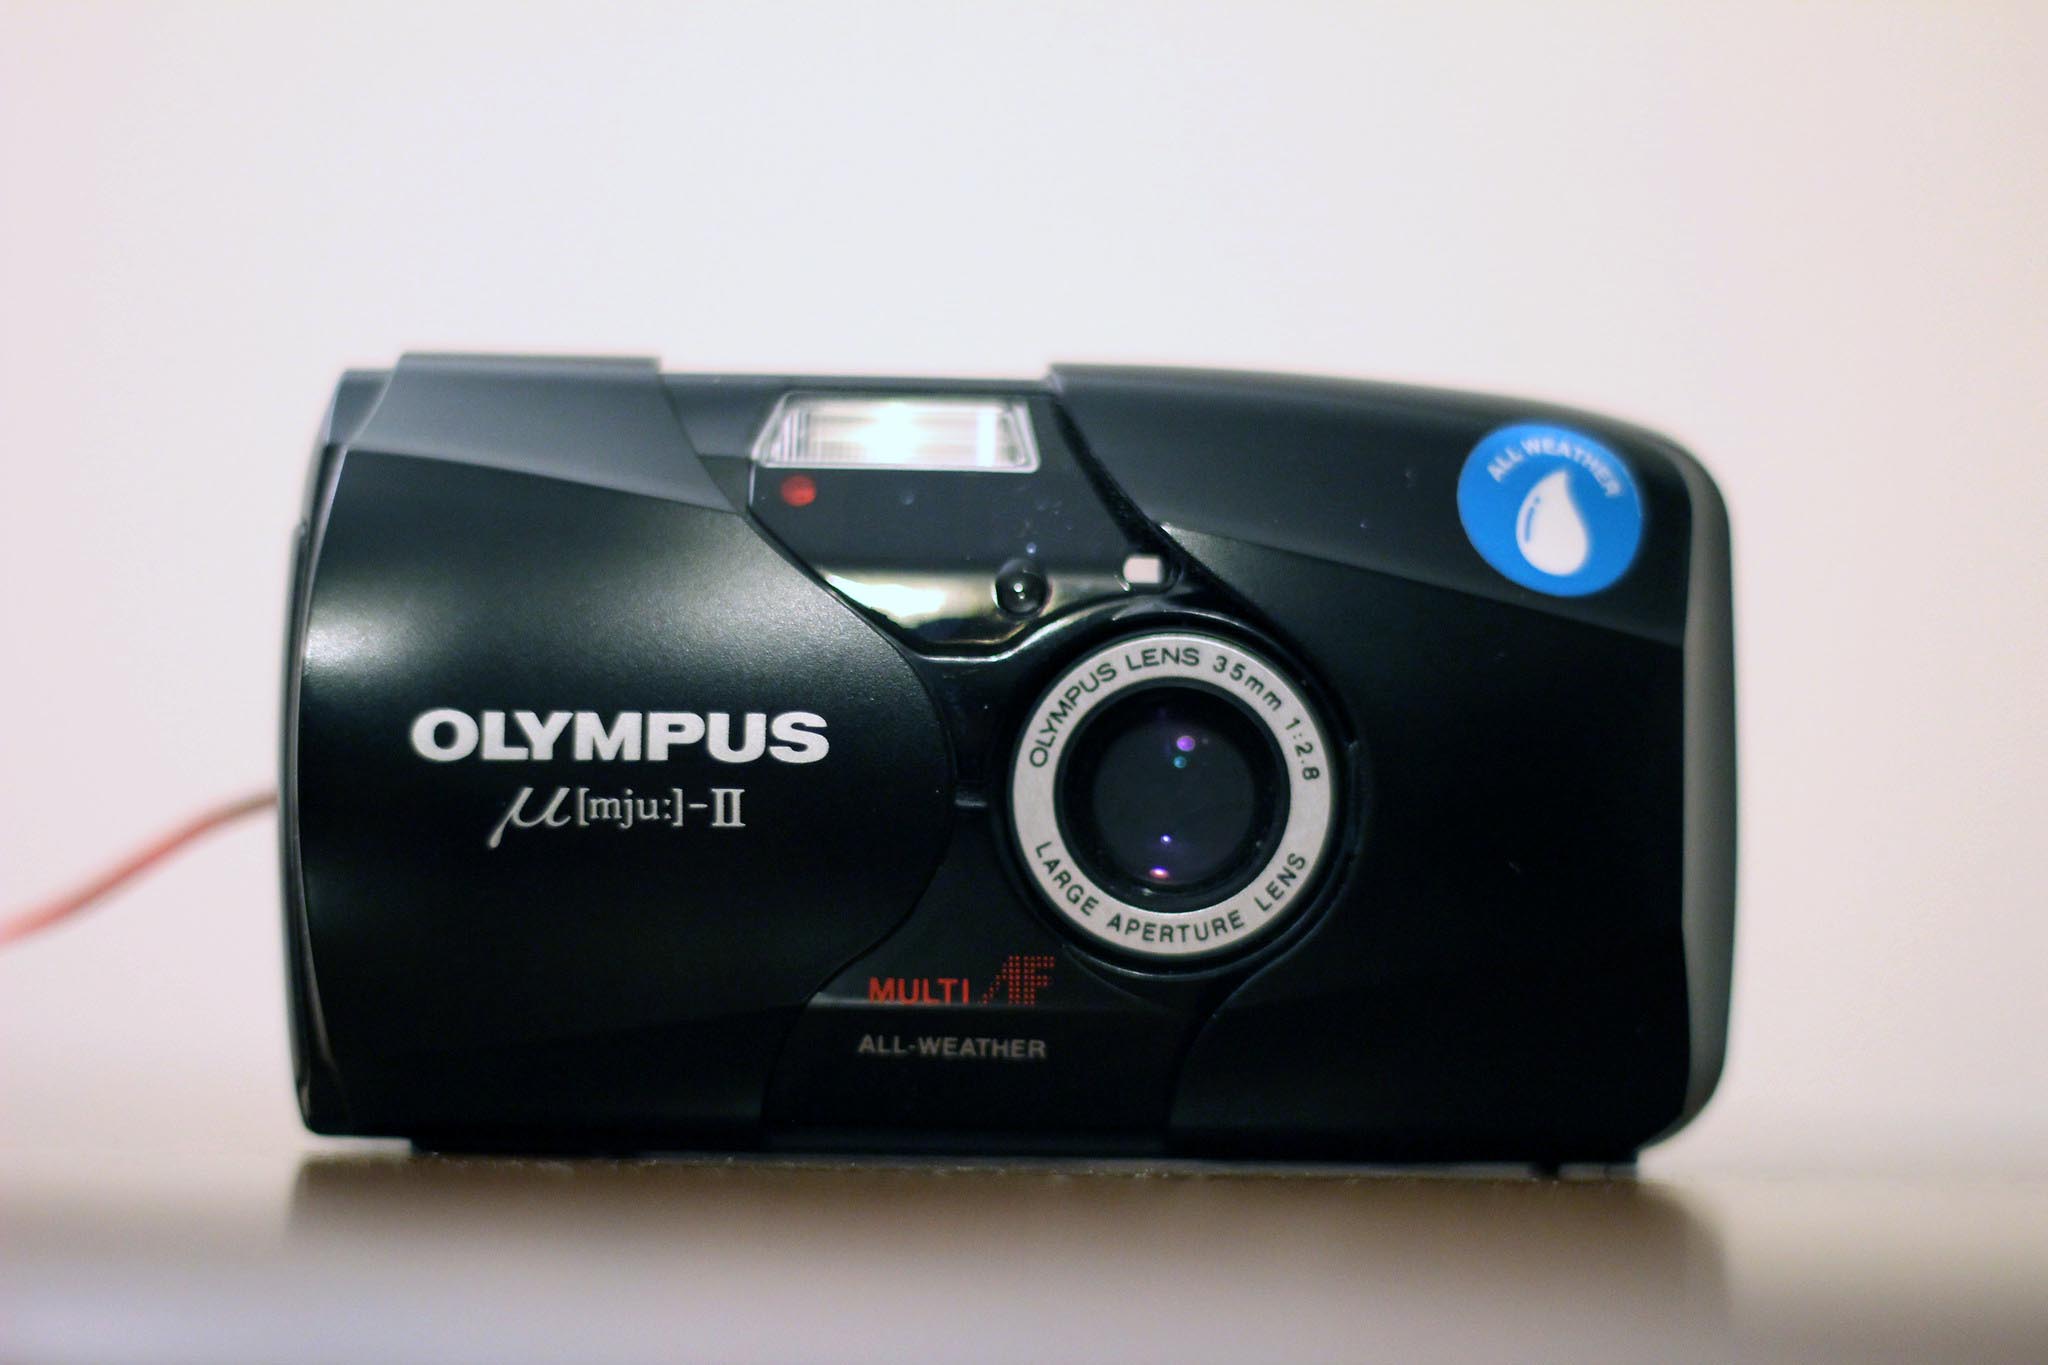 Olympus Stylus Epic Review: The most trending point and shoot film camera?